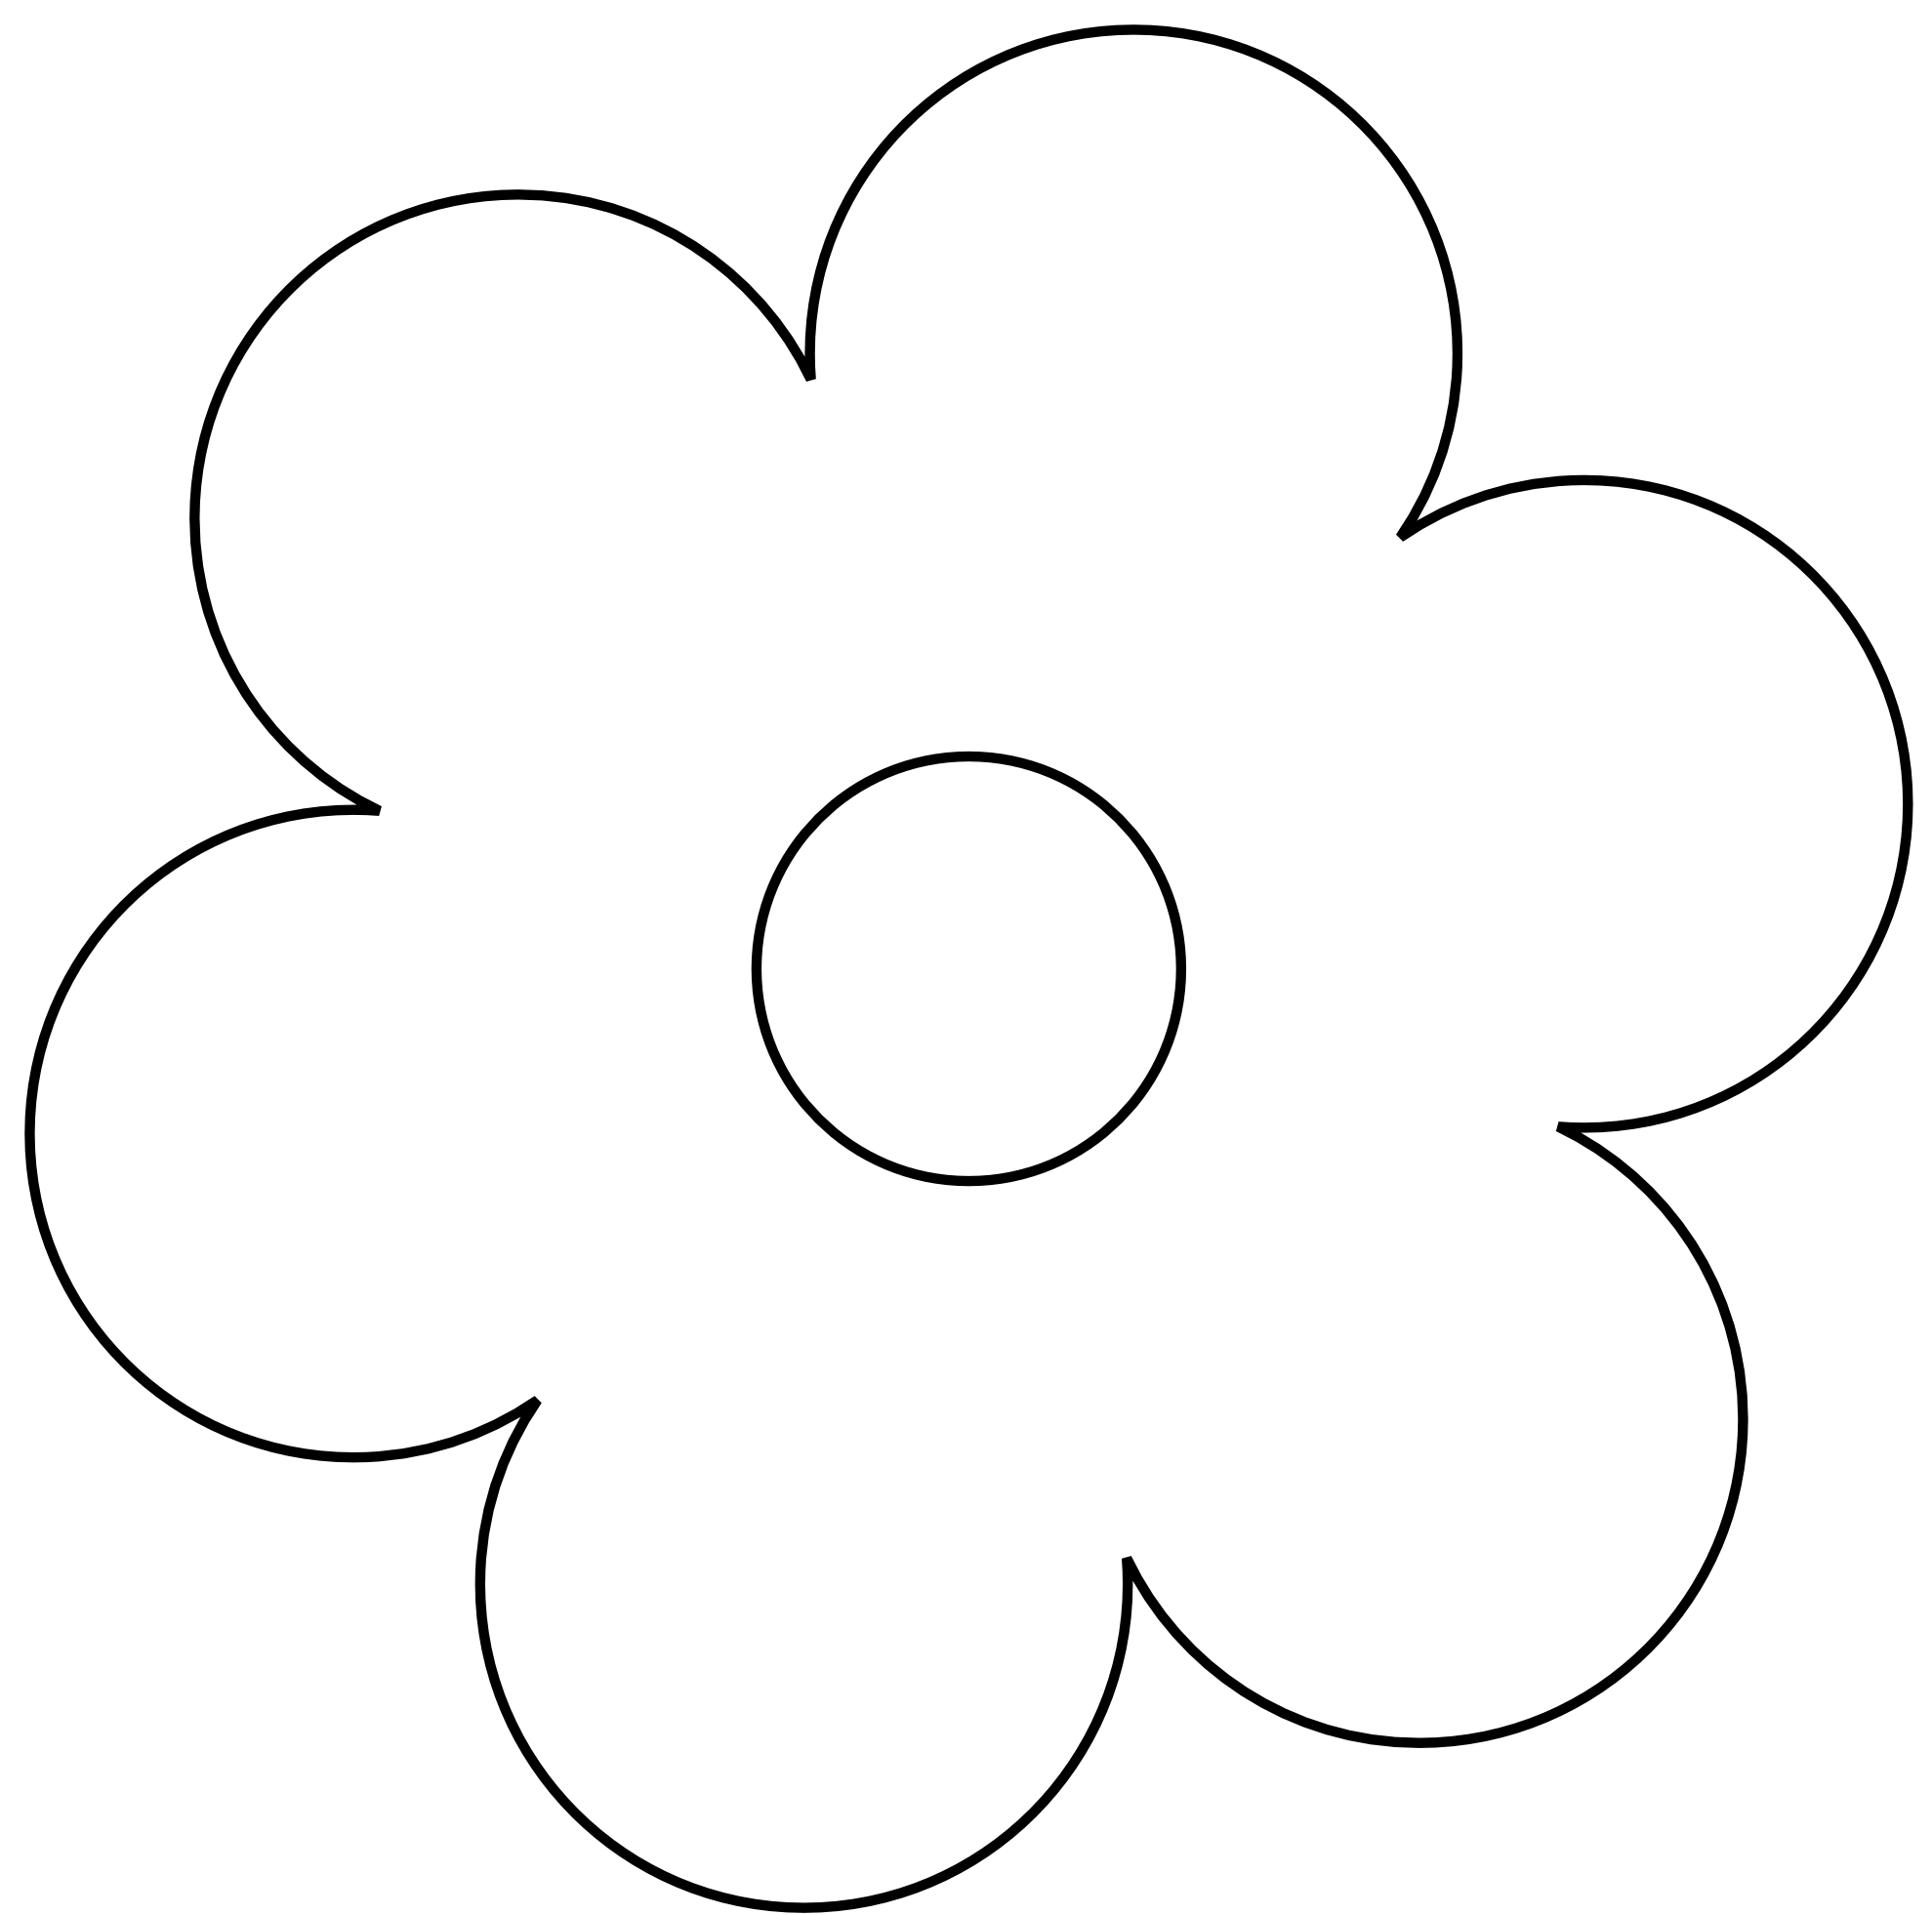 free black and white clipart of flowers - photo #35